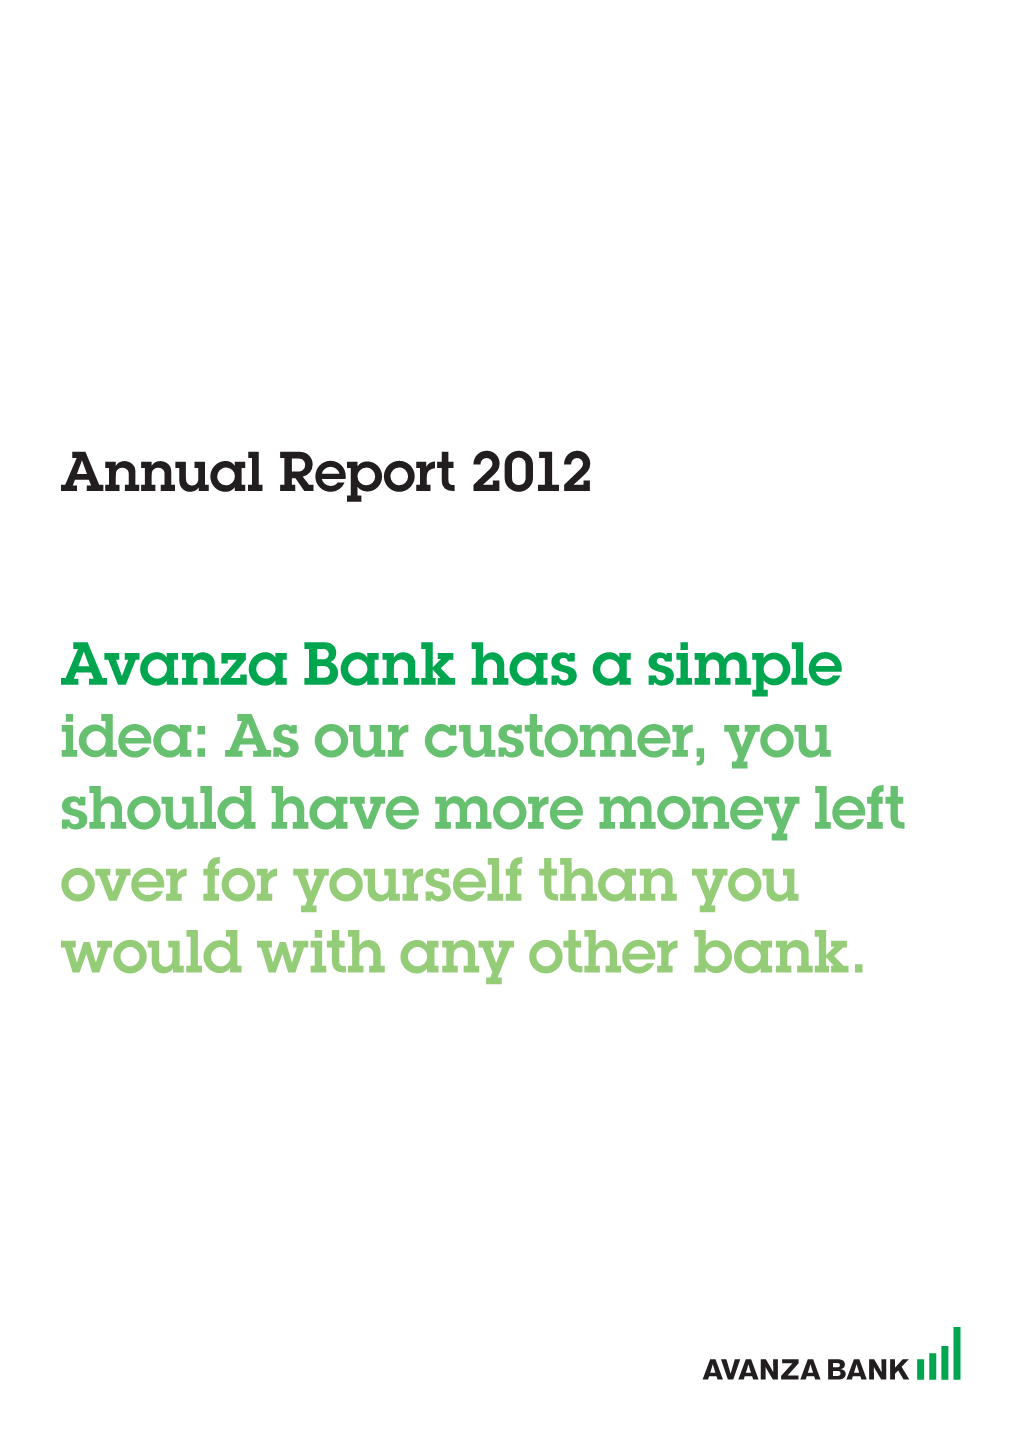 Avanza Bank Has a Simple Idea: As Our Customer, You Should Have More Money Left Over for Yourself Than You Would with Any Other Bank